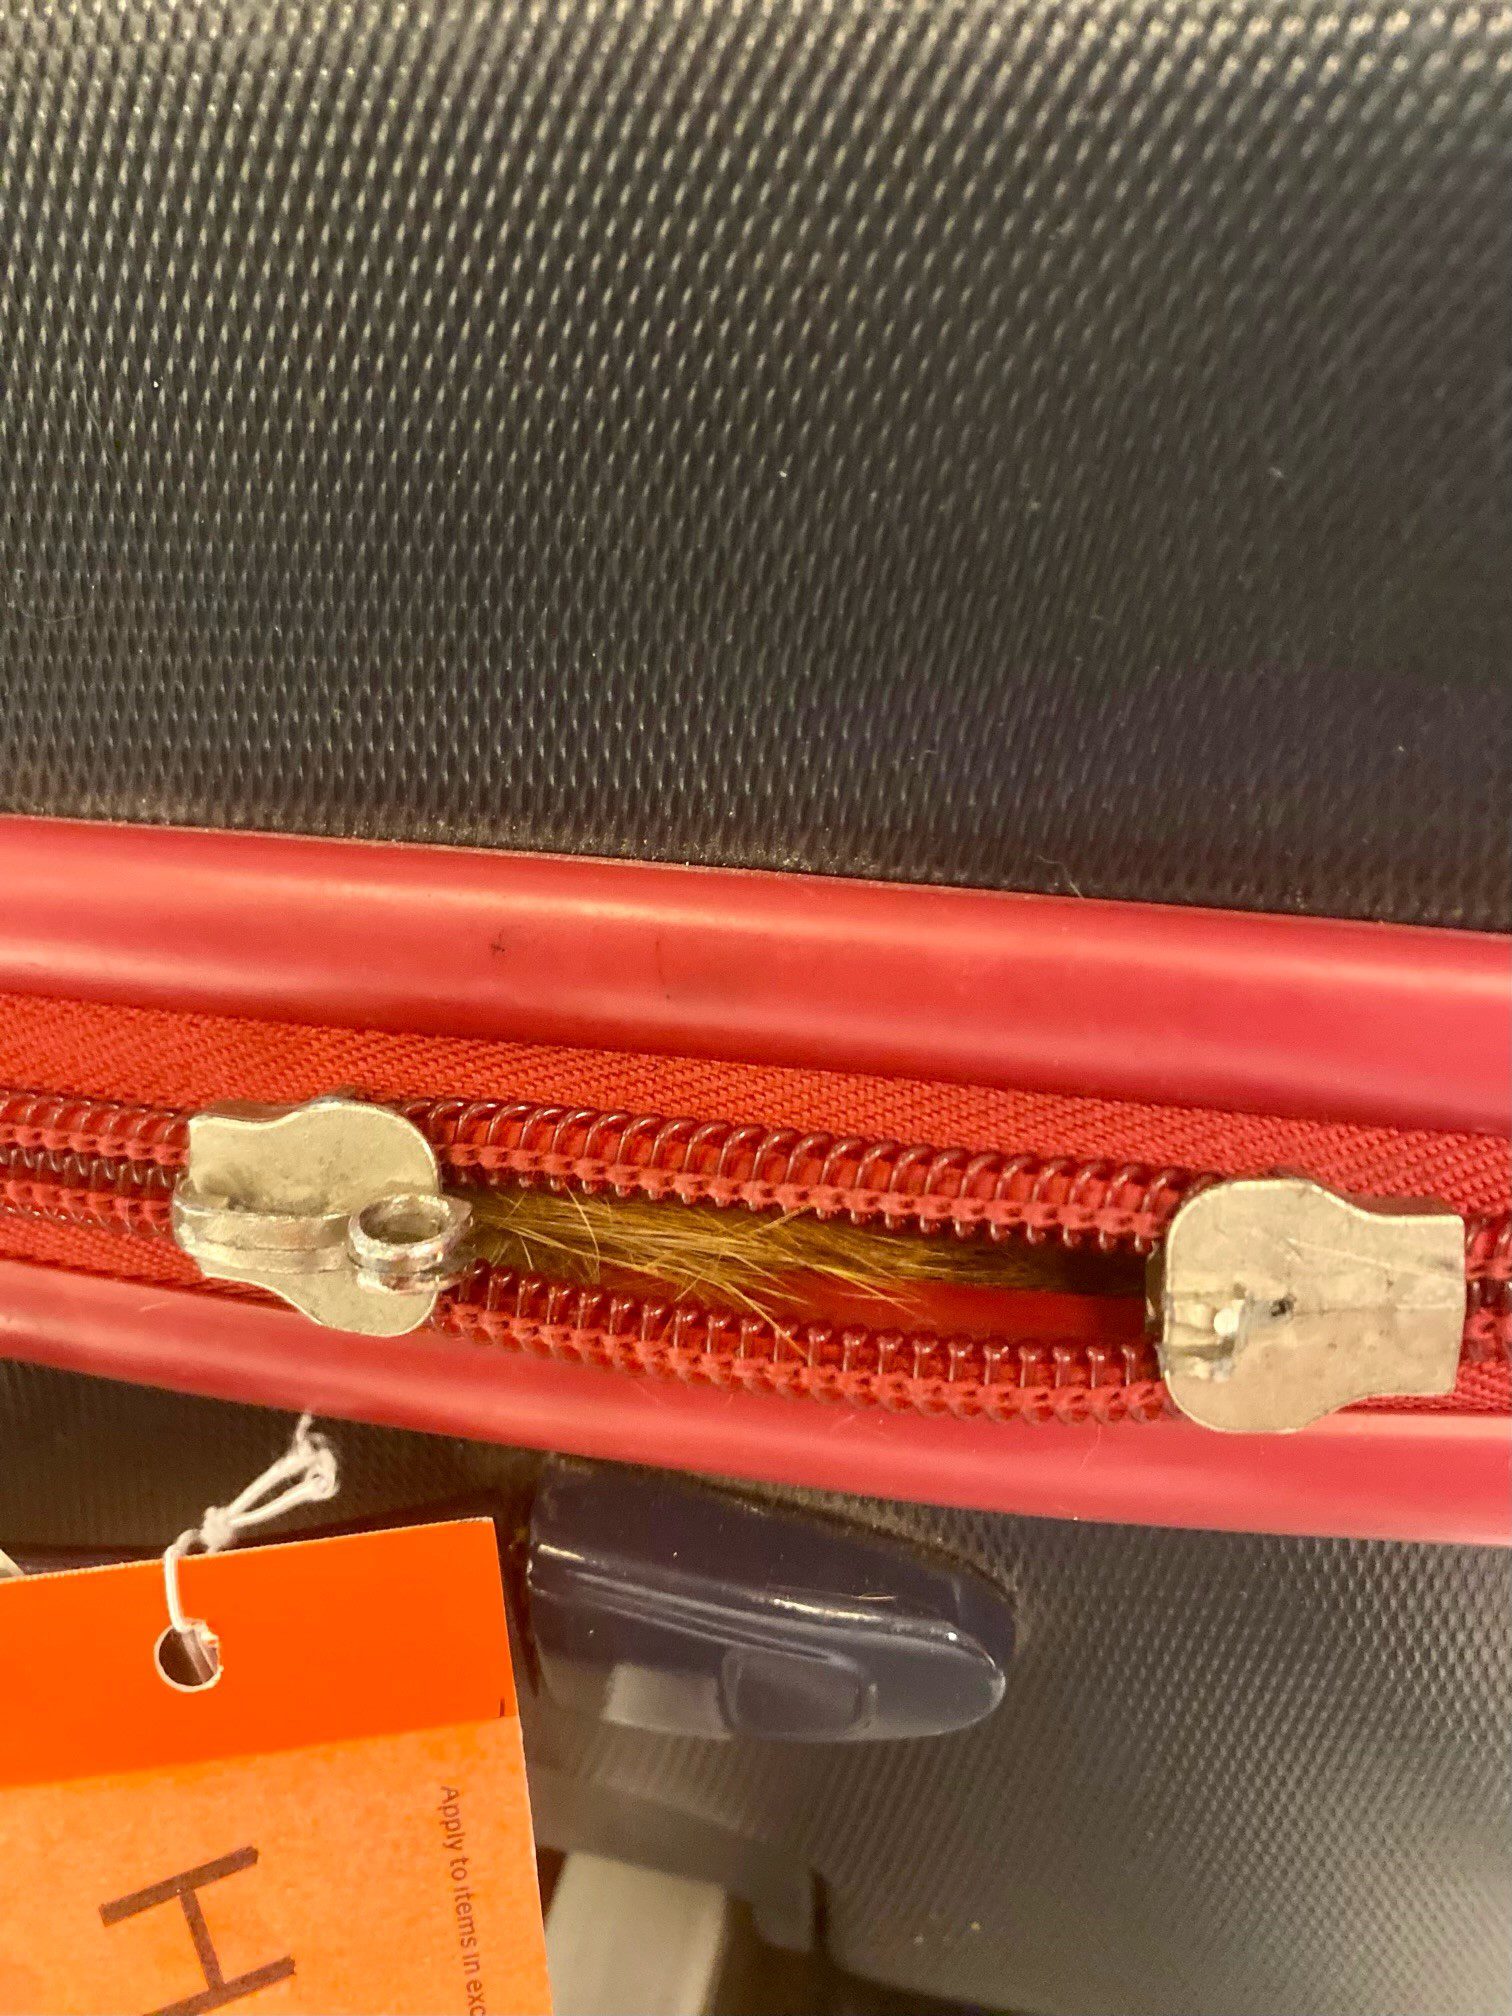 A picture of an orange hair sticking out of a suitcase.